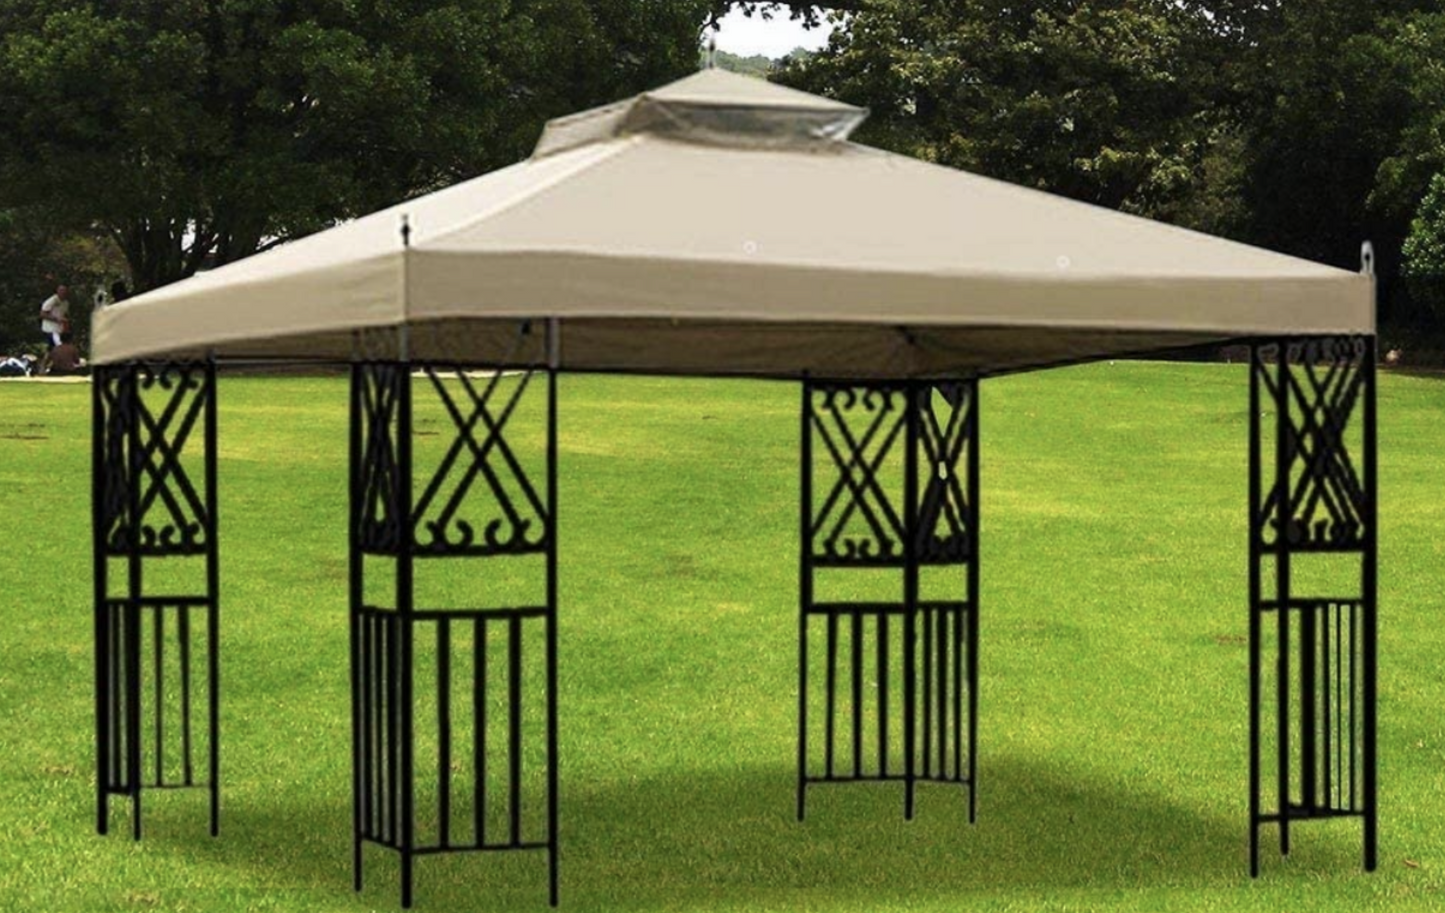 2 Tier 12x10' Gazebo Canopy Top Cover Replacement for Sunjoy L-GZ288PST-4H